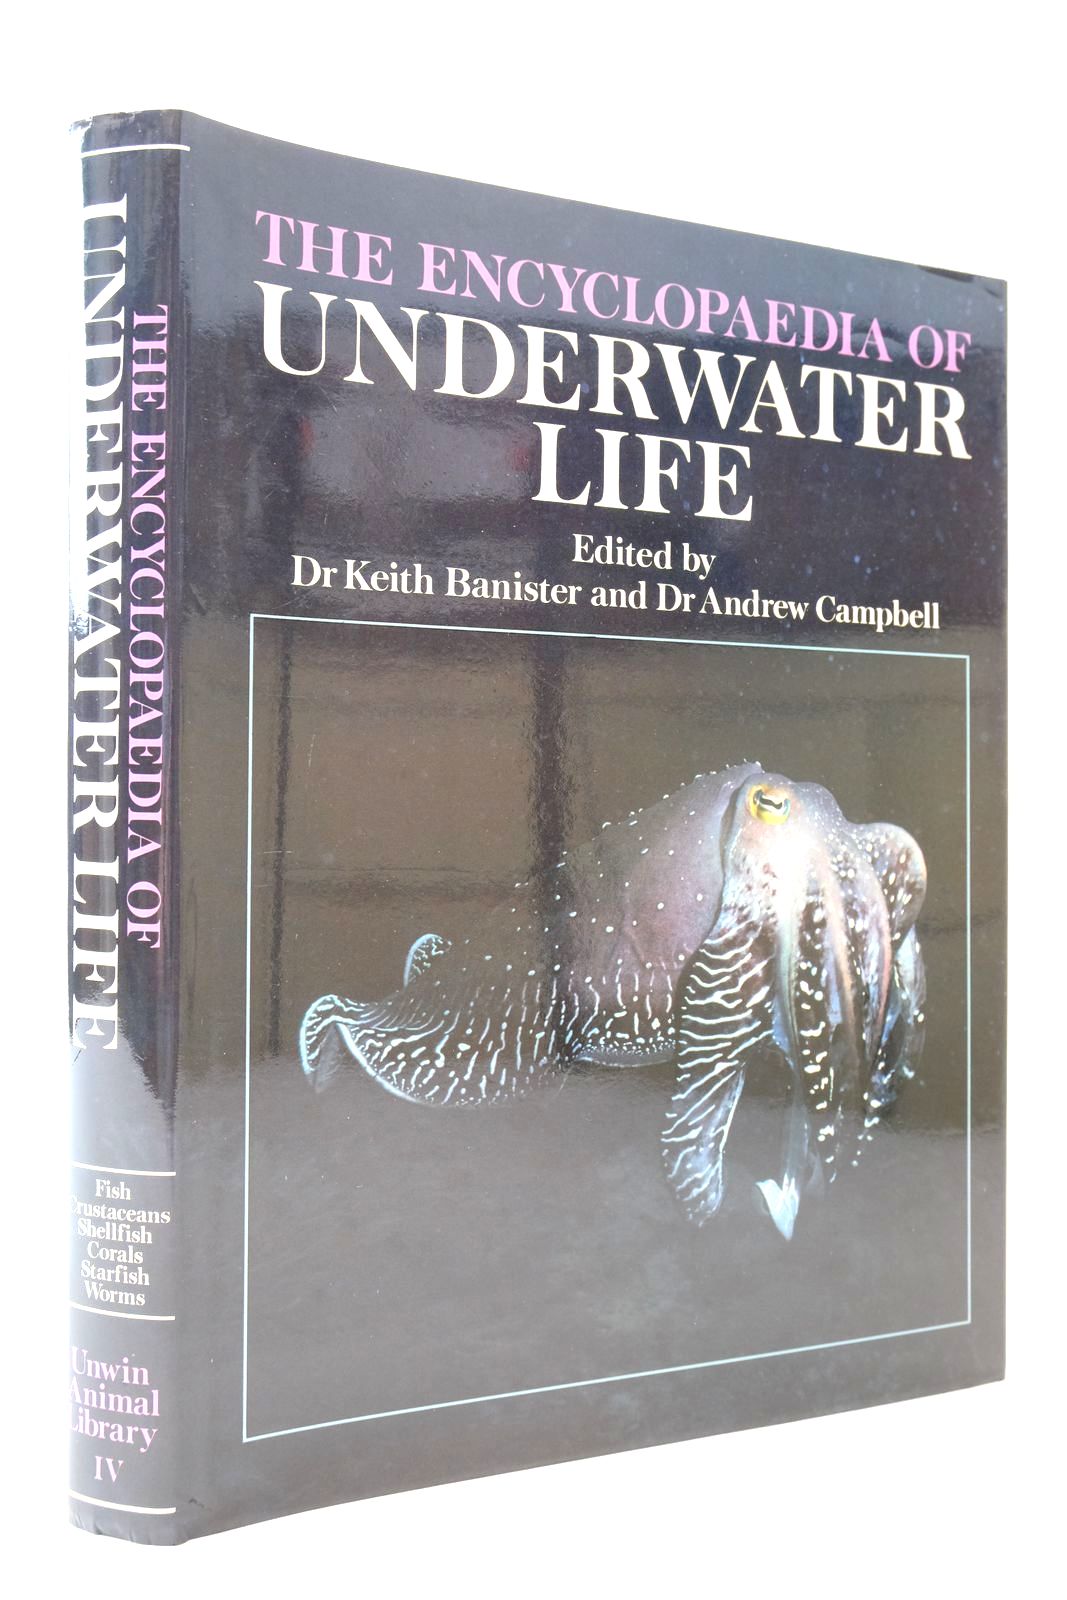 Photo of THE ENCYCLOPAEDIA OF UNDERWATER LIFE written by Banister, Keith Campbell, Andrew published by George Allen &amp; Unwin (STOCK CODE: 2139351)  for sale by Stella & Rose's Books